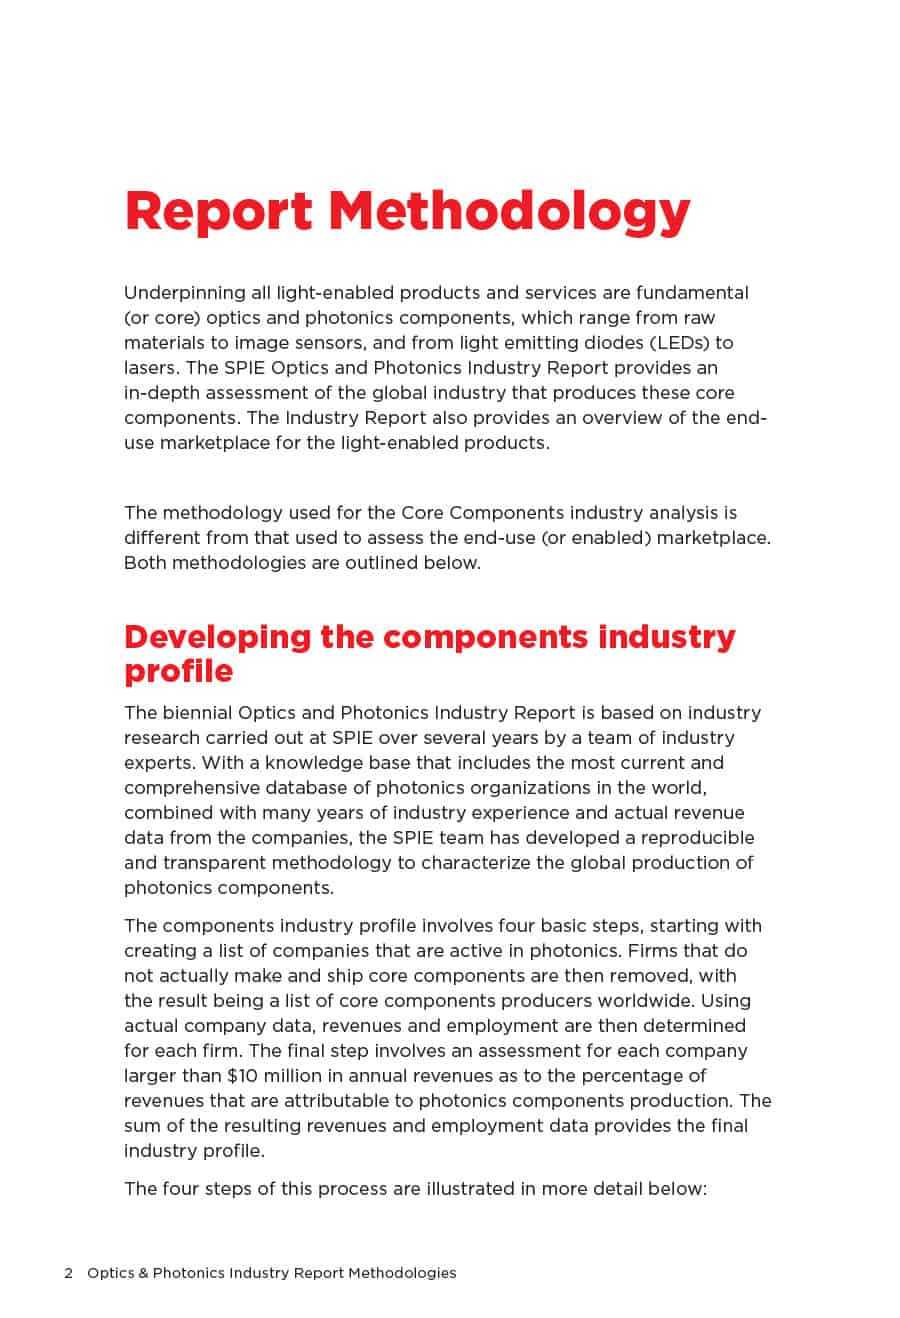 39 Free Industry Analysis Examples & Templates ᐅ Templatelab With Regard To Industry Analysis Report Template